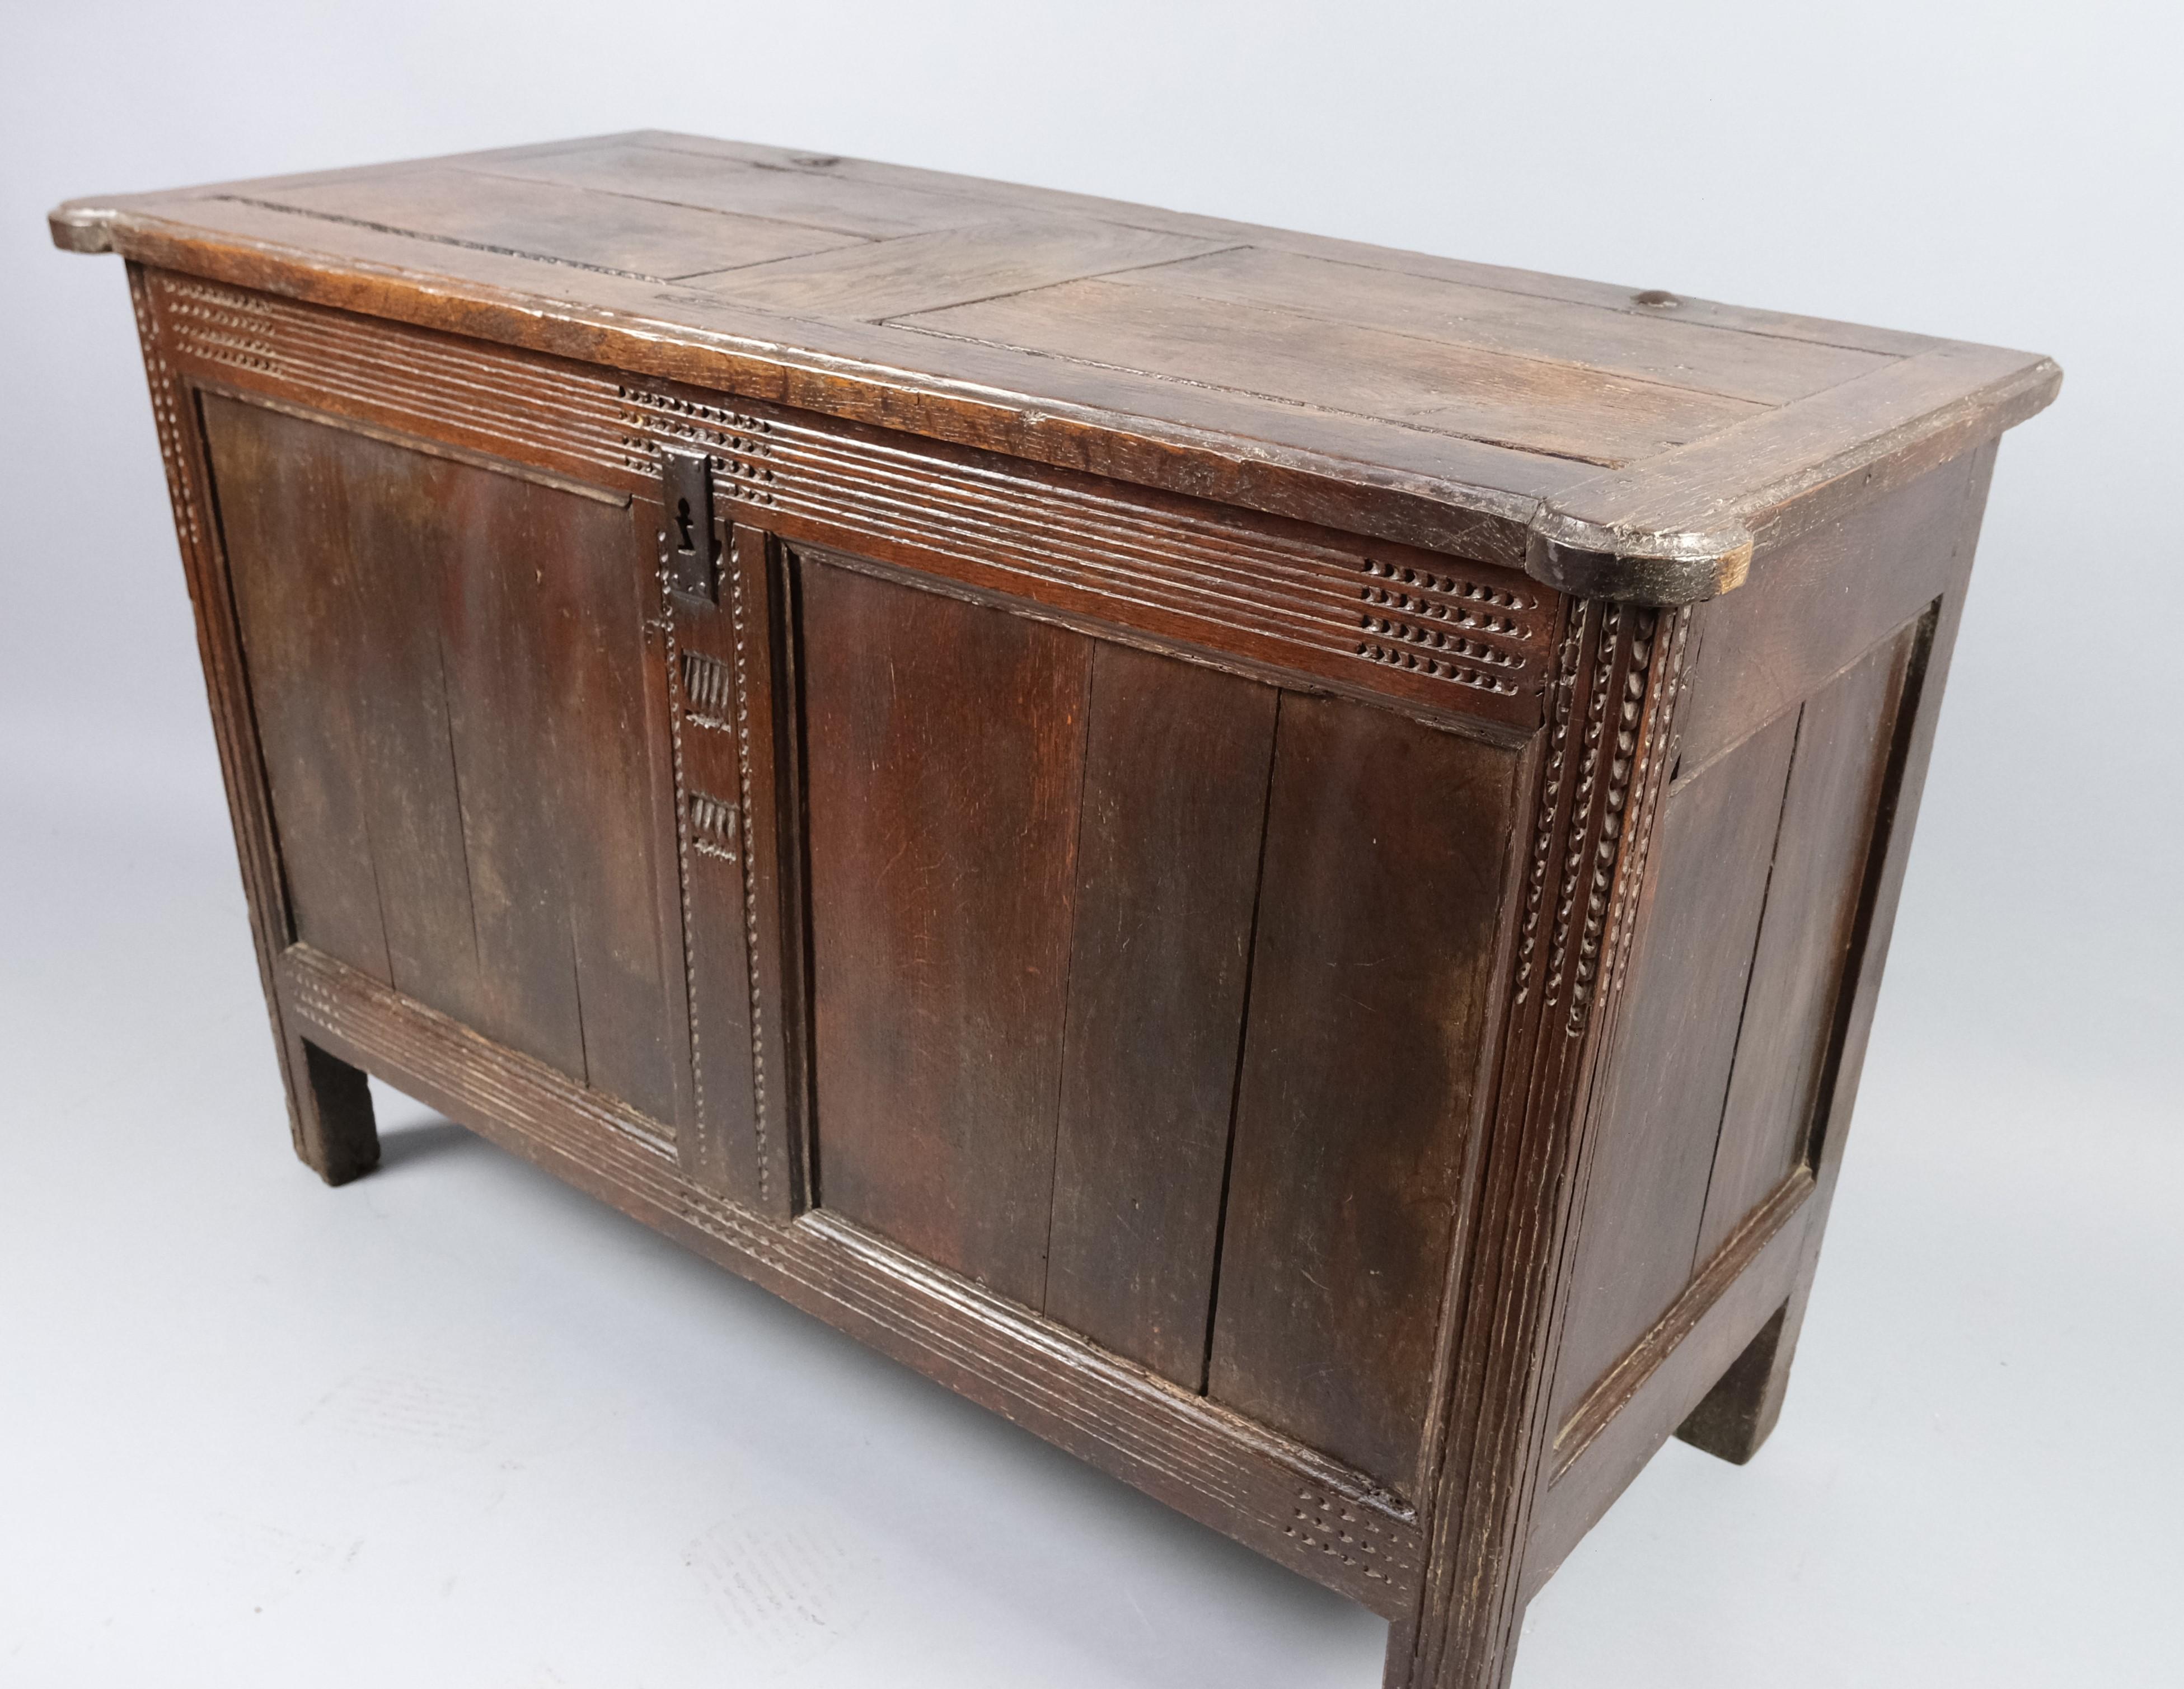 Hutton-Clarke Antiques takes pride in presenting an exquisite French antique oak coffer, dating back to approximately 1750. This charming piece is attributed to the Caen region of France and stands as a testament to the craftsmanship of its time.